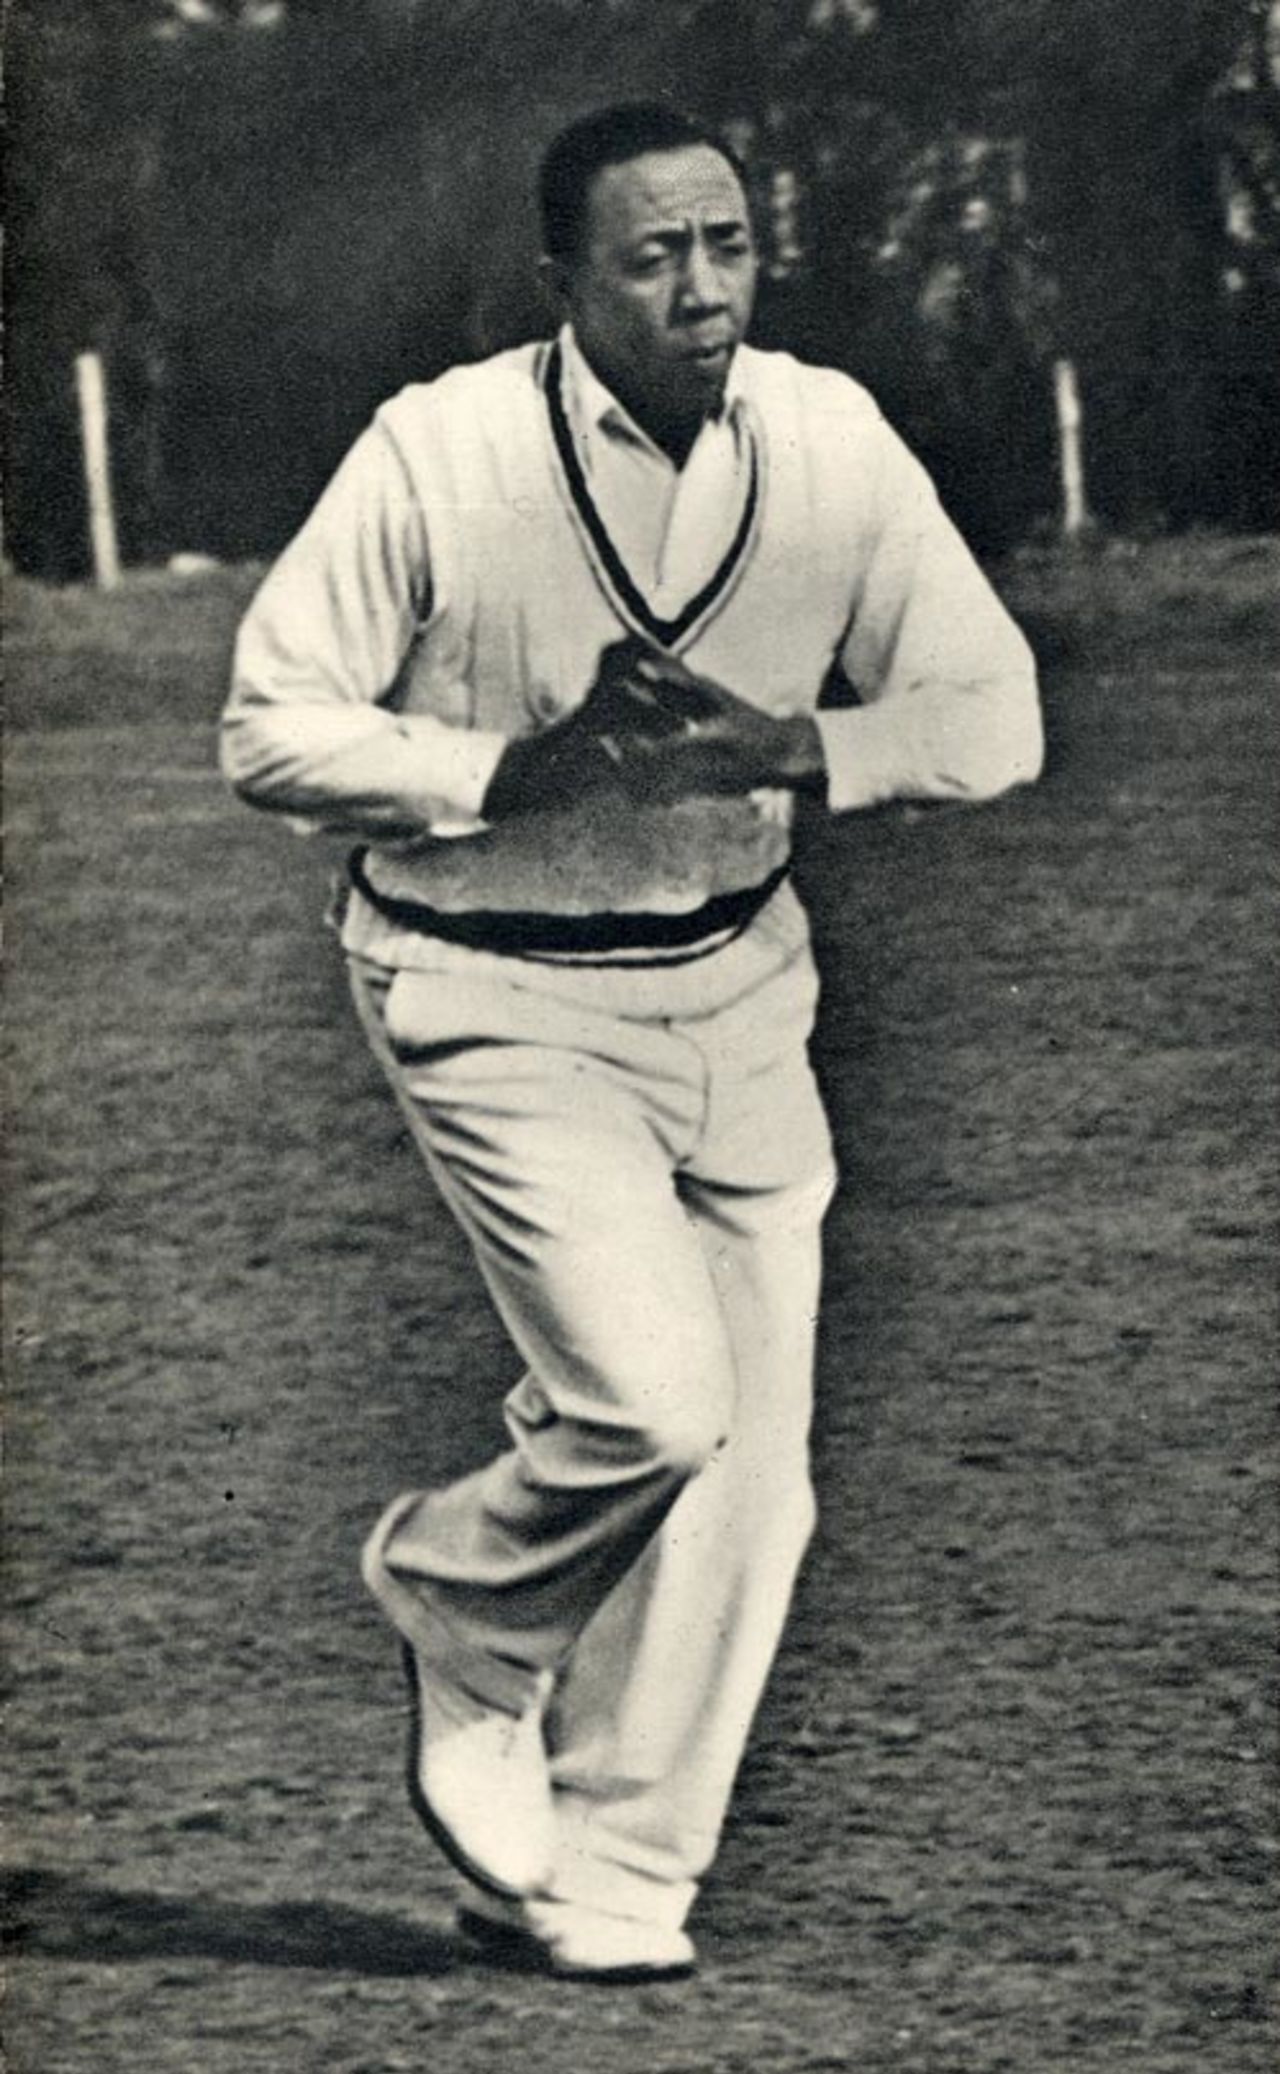 Learie Constantine runs in to bowl